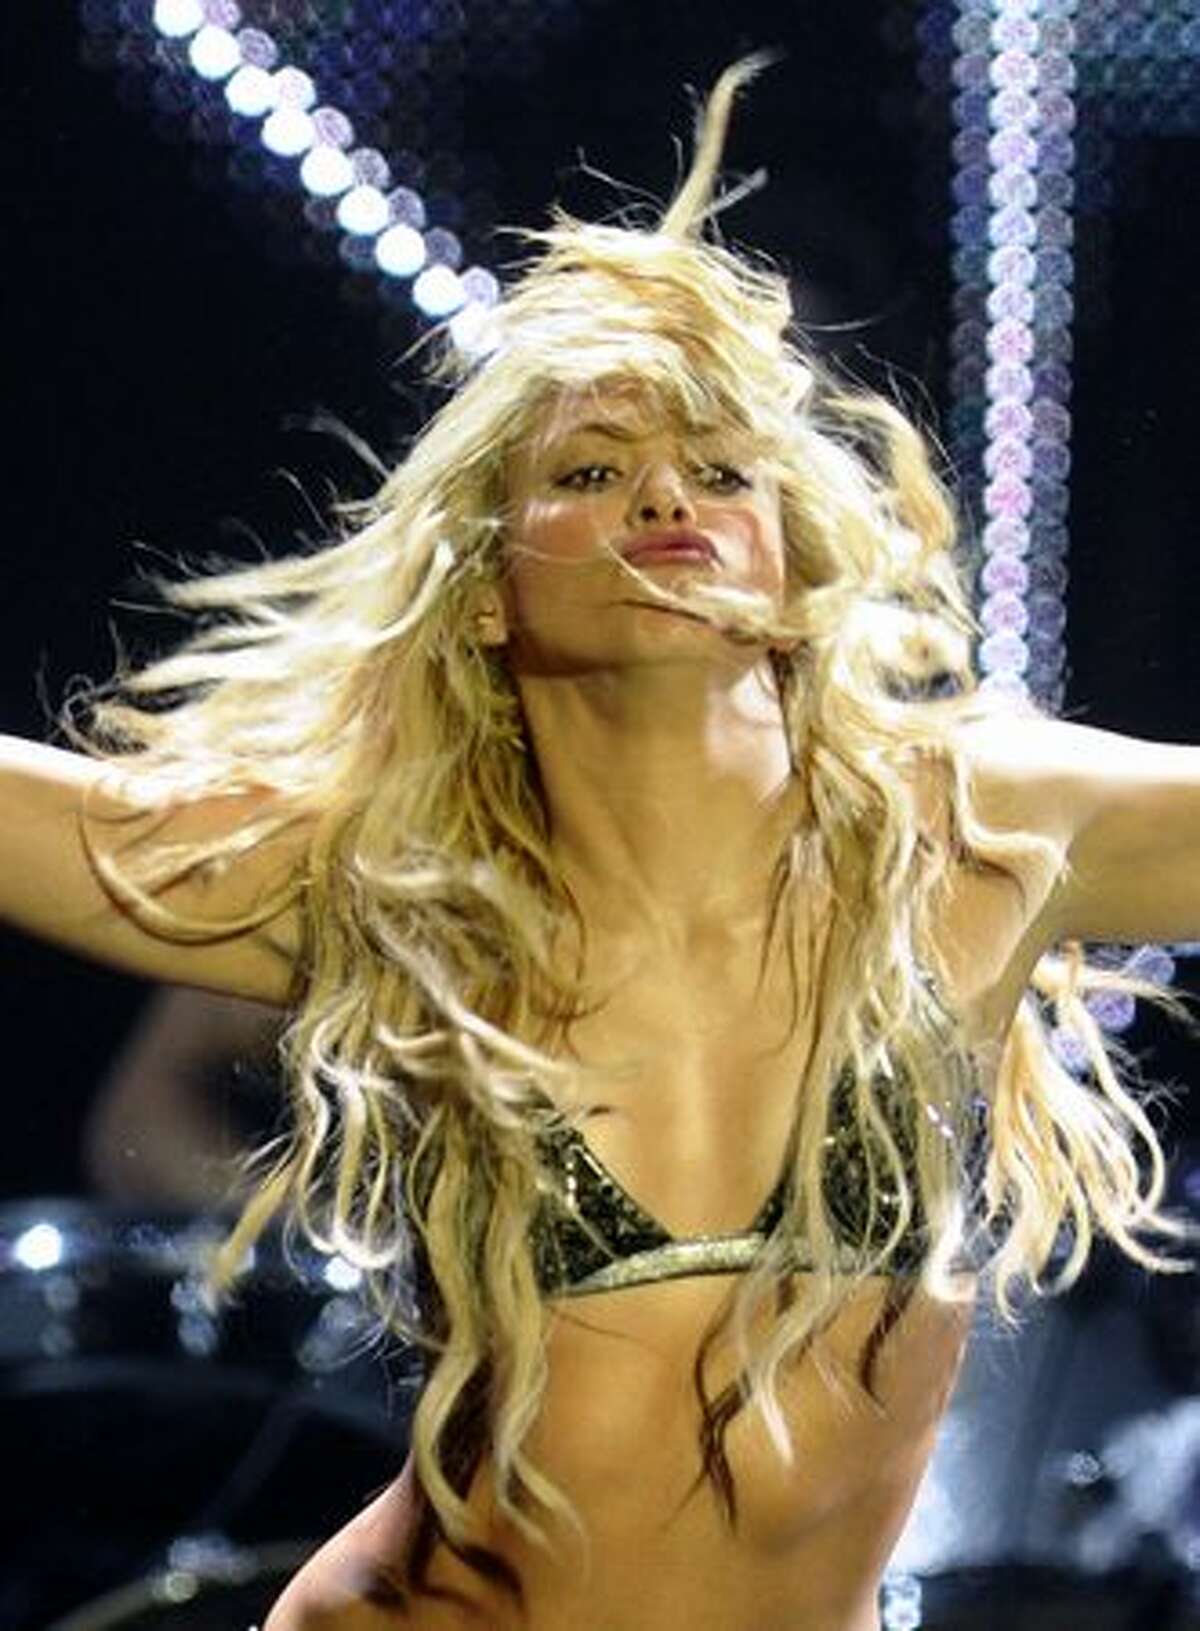 Colombian singer Shakira performs during the 2010 European MTV Awards at the Caja Magica in Madrid.